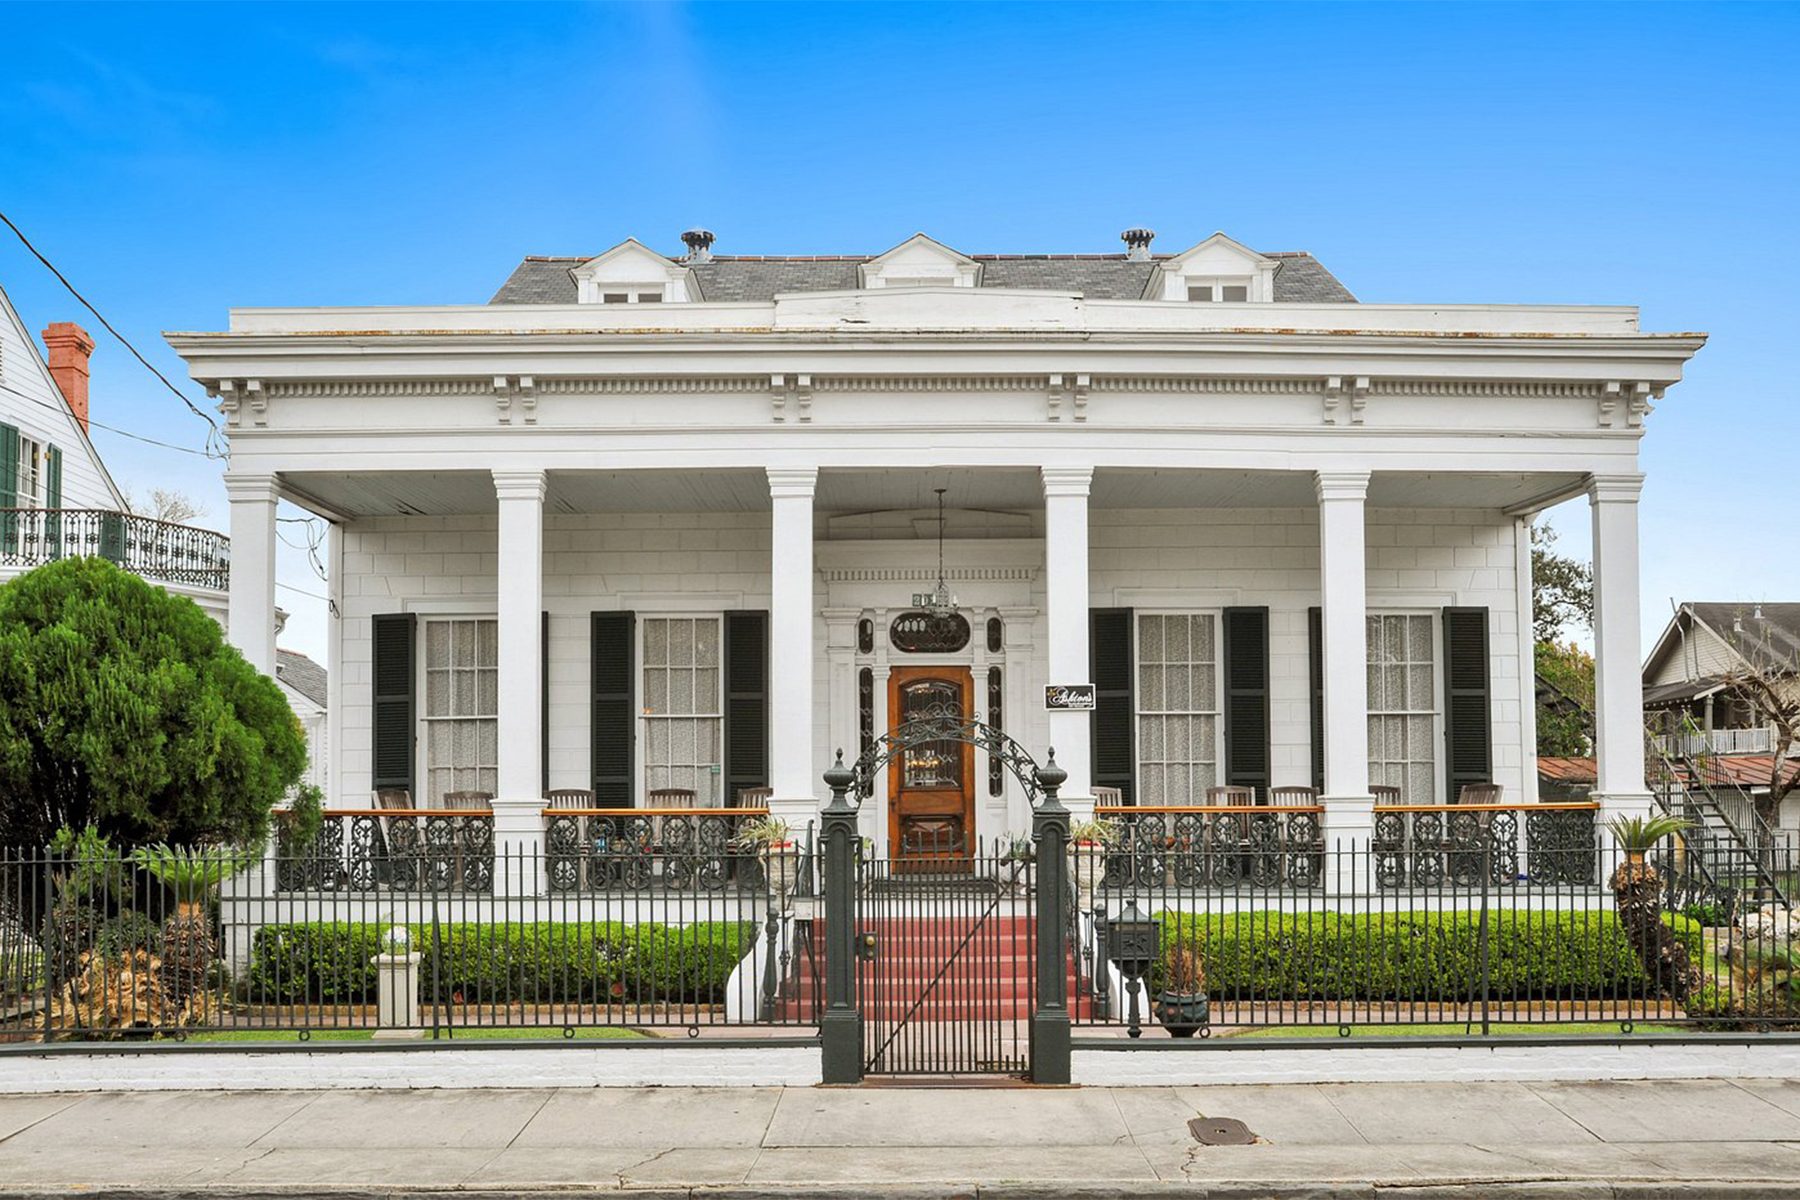 <h3 class="">New Orleans, Louisiana</h3> <p class=""><strong>Best for: </strong>A historic stay away from the crowds in the French Quarter </p> <p><a href="https://www.tripadvisor.com/Hotel_Review-g60864-d76973-Reviews-Ashton_s_Bed_and_Breakfast-New_Orleans_Louisiana.html" rel="noopener">Ashton's Bed & Breakfast</a> offers a quiet romantic retreat away from the revelry of Bourbon Street—yet it's not too far from the famed restaurants, nightlife and fun of the Big Easy. The historic property, located in a residential neighborhood halfway between the French Quarter and City Park, has eight distinct guest rooms in the main house or patio wing. Each themed room (think: Jazz Festival and Mardi Gras) accommodates up to two guests and features private baths, luxury linens and toiletries, individually controlled heating and cooling controls, and more. Some rooms also have BainUltra ThermoMasseur whirlpool tubs.</p> <p>You'll be treated to a homemade breakfast each morning that may include New Orleans specialties like Mardi Gras eggs Benedict with Cajun tasso hollandaise or bananas foster Belgian waffles. Guests say that owner and innkeeper Patrick Ashton's breakfasts are one of the highlights (and some of the best meals) during a <a href="https://www.rd.com/article/best-time-to-visit-new-orleans/">trip to New Orleans</a>. After a day of exploring in the city, they also appreciate the peace and quiet back at the inn—enjoying the cool shade of a 400-year-old live oak on the rear patio or rocking away in a cozy chair on the front veranda.</p> <p><strong>Pros:</strong></p> <ul> <li class="">One fully accessible guestroom (Mardi Gras) and accessible routes around the property</li> <li class="">Free and secure off-street parking</li> <li class="">Complimentary snacks and beverages</li> </ul> <p><strong>Con:</strong></p> <ul> <li class="">The property only allows service dogs</li> </ul> <p class="listicle-page__cta-button-shop"><a class="shop-btn" href="https://www.tripadvisor.com/Hotel_Review-g60864-d76973-Reviews-Ashton_s_Bed_and_Breakfast-New_Orleans_Louisiana.html">Book Now</a></p>